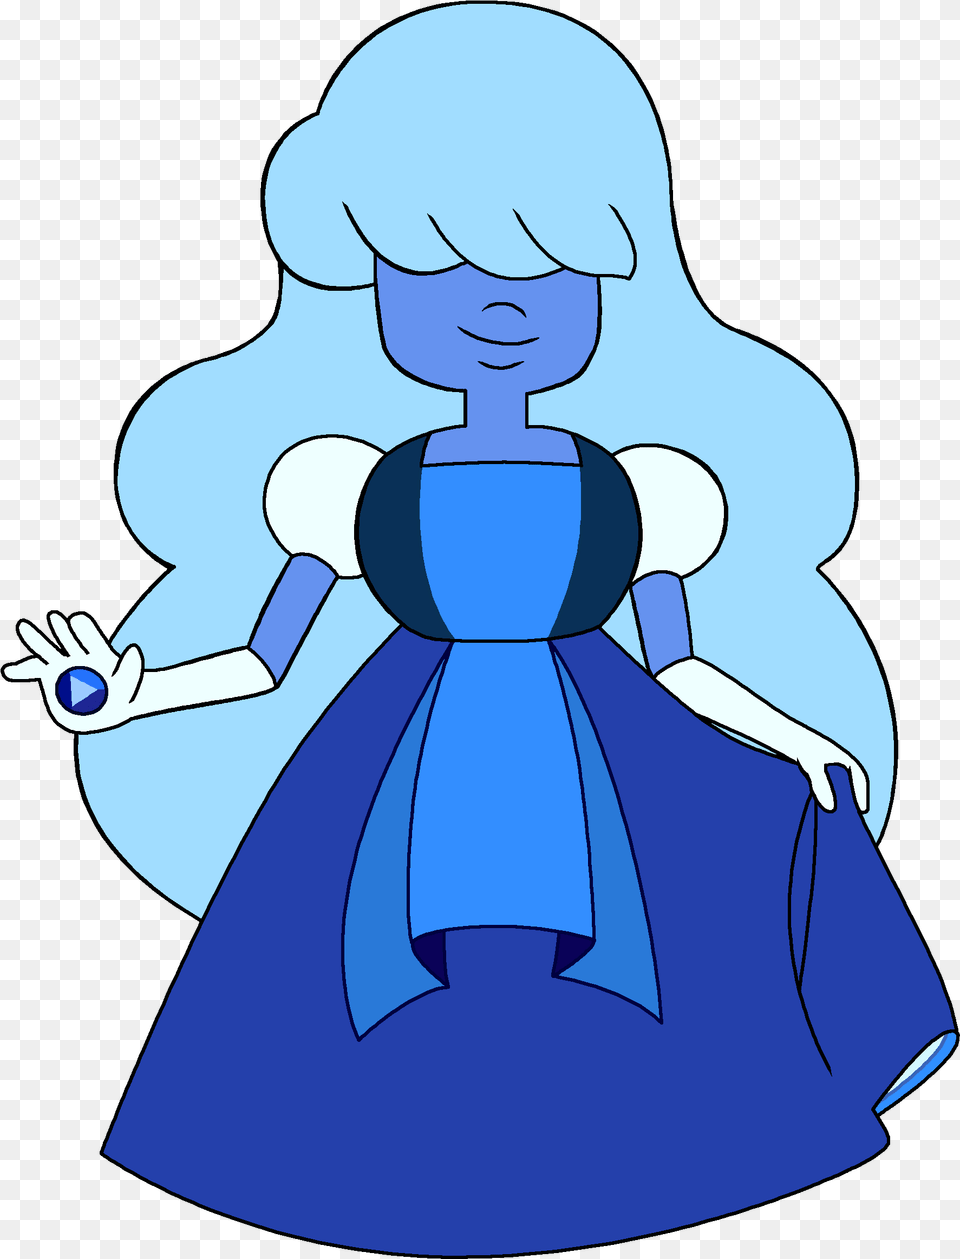 Steven Universe Wiki Sapphire Steven Universe Characters, Clothing, Dress, Baby, Person Png